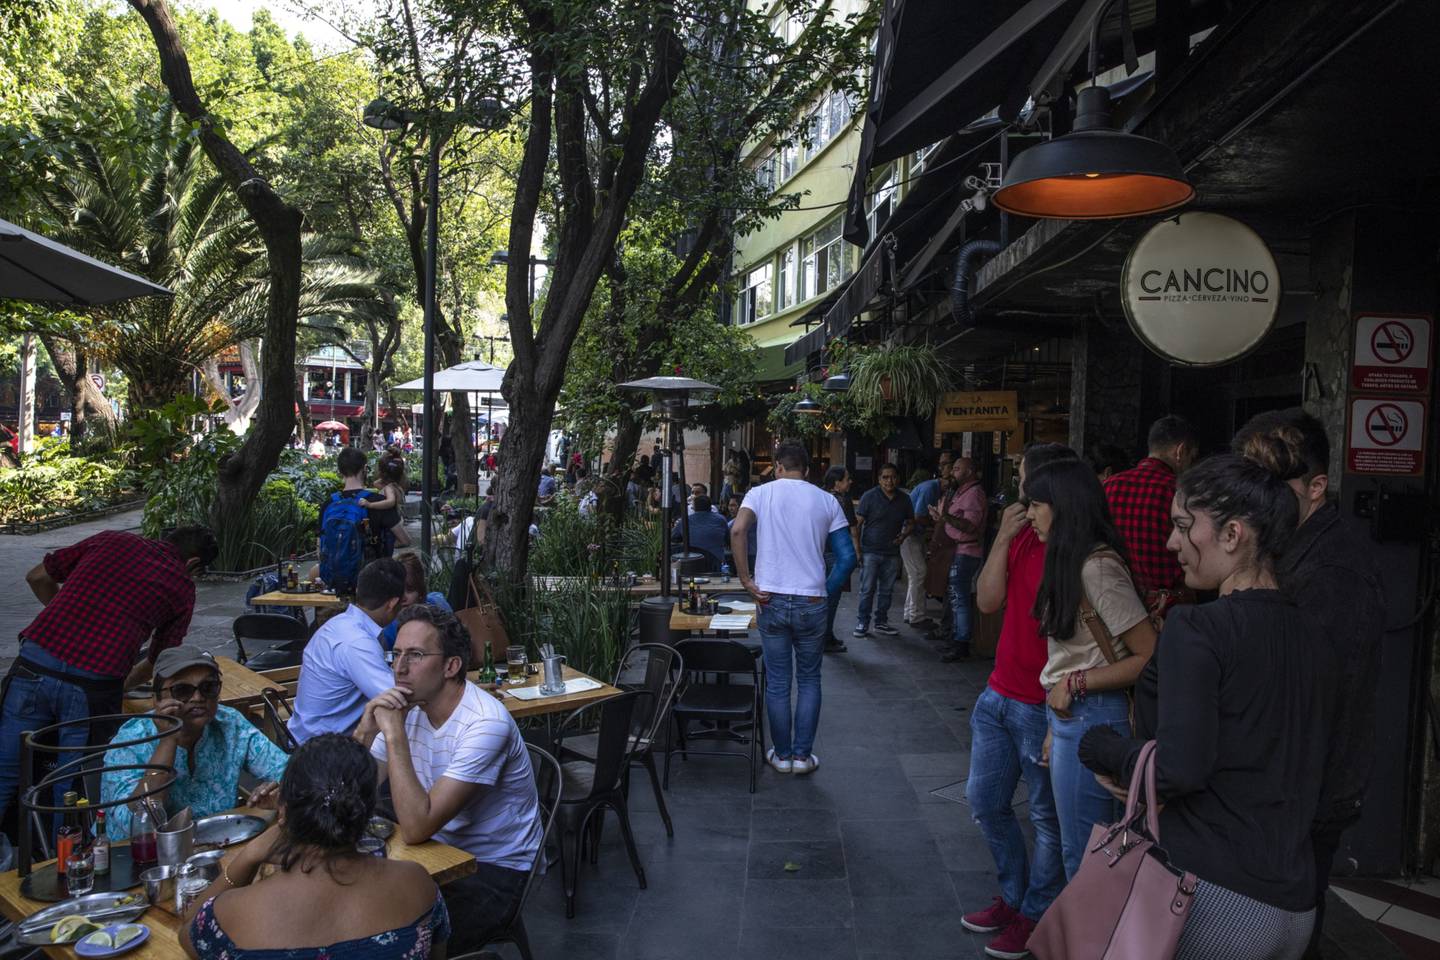 People sit outside a restaurant in the Roma neighborhood of Mexico City, Mexico, on Thursday, July 4, 2019. Photographer: Alejandro Cegarra/Bloomberg